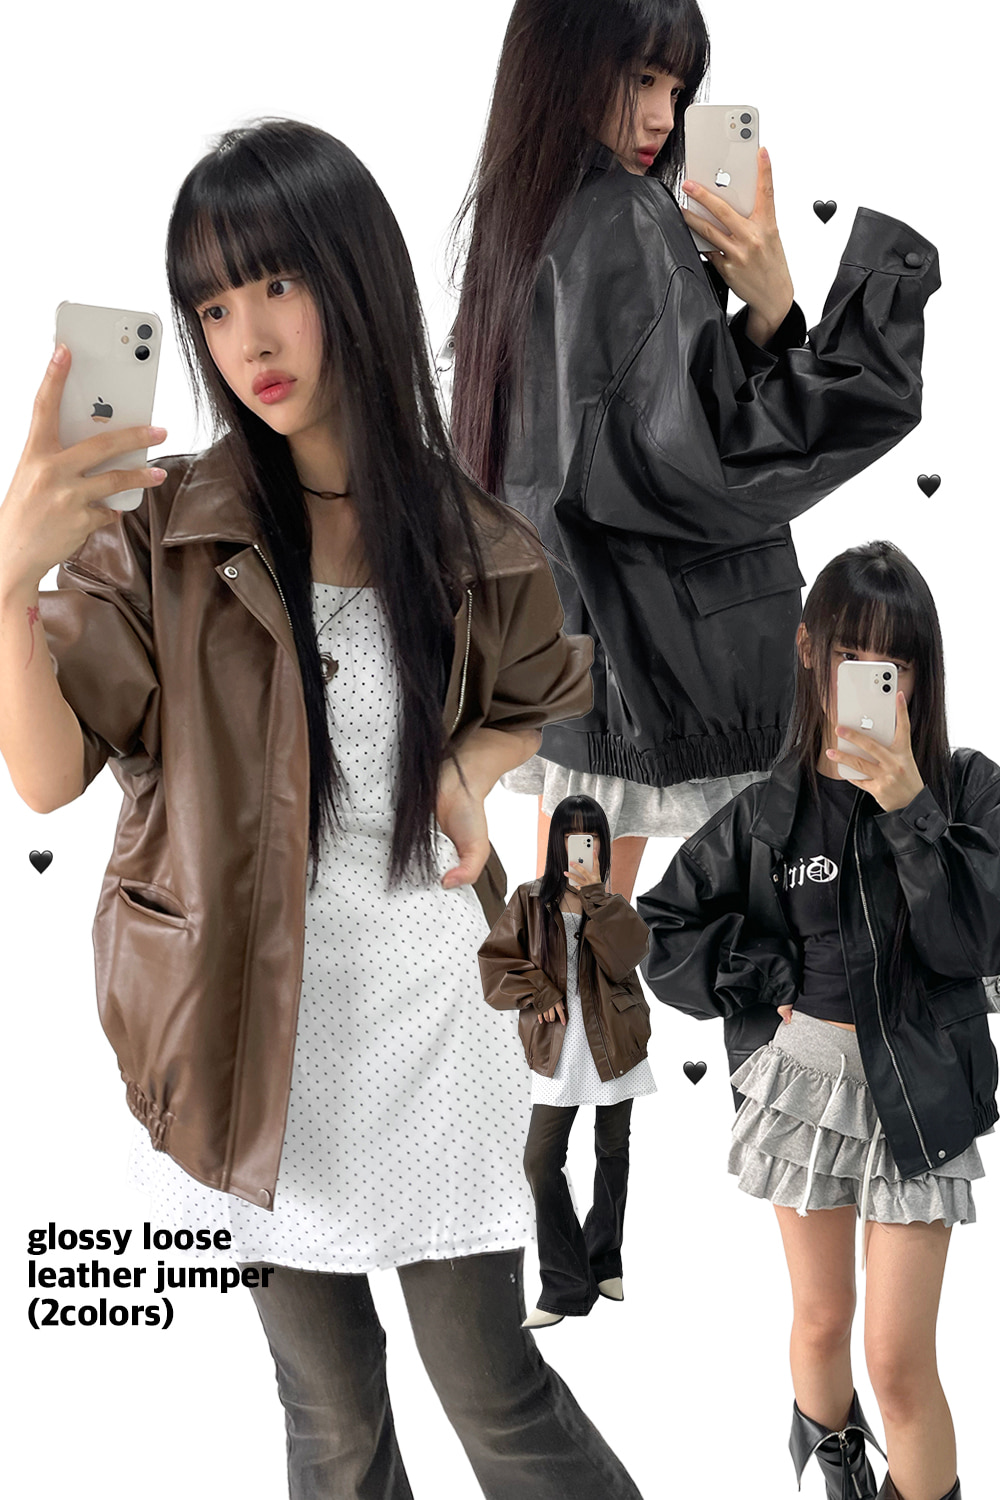 glossy loose leather jumper (2colors)